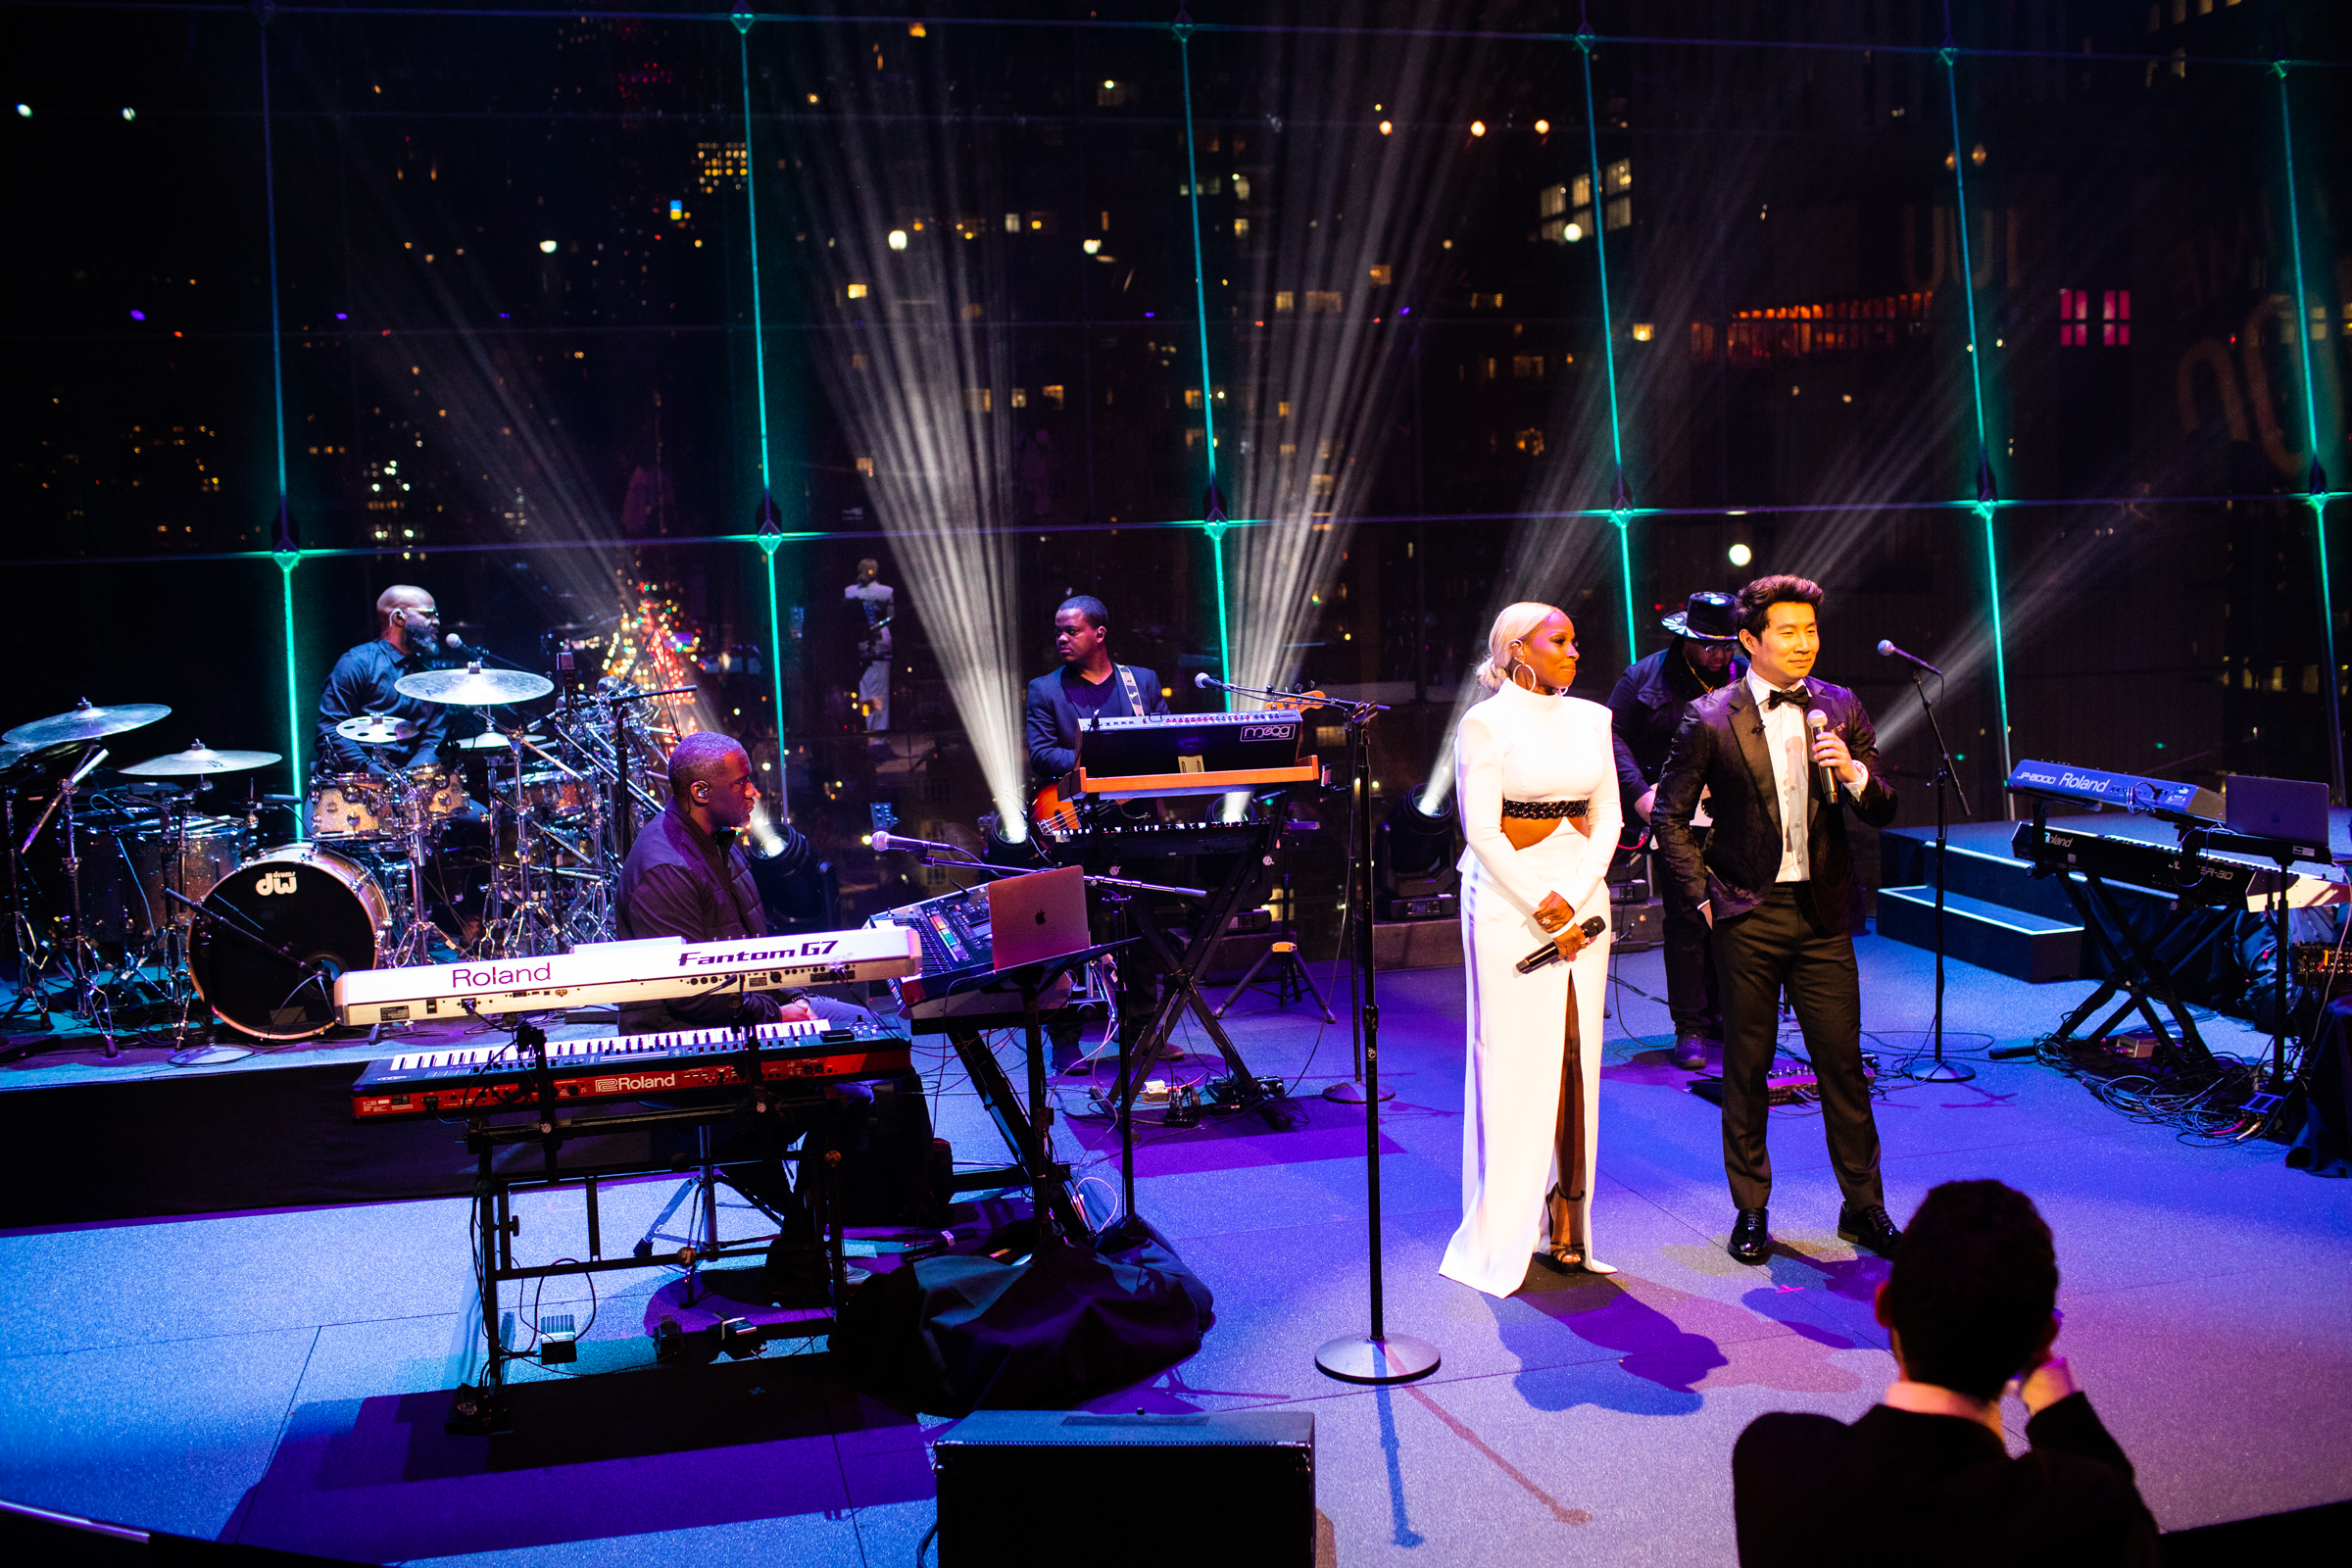 Mary J. Blige onstage with Simu Liu at the TIME 100 Gala at Jazz at Lincoln Center in New York City, on June 8, 2022. (Landon Nordeman for TIME)